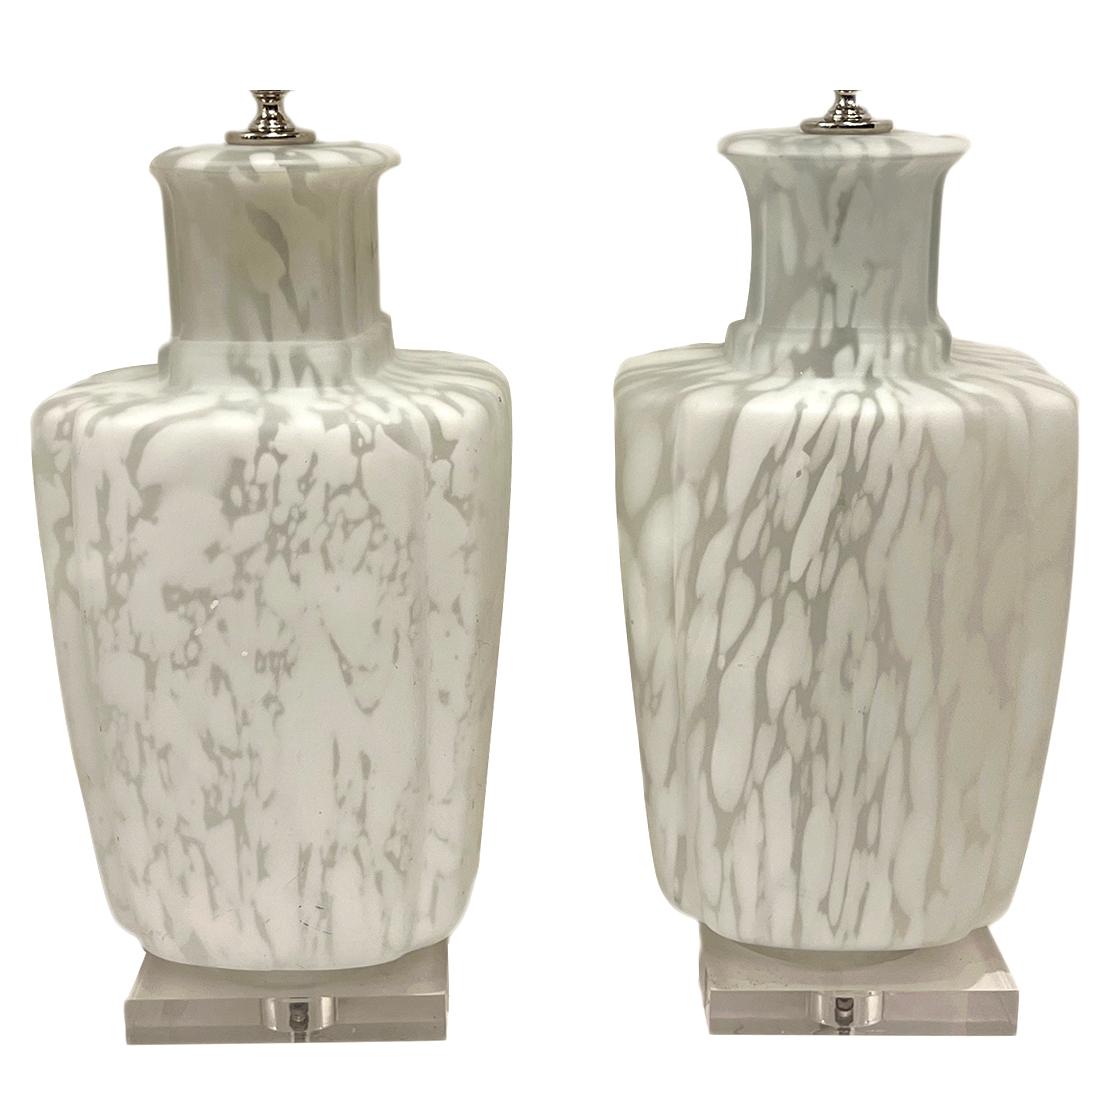 Pair of 1960s Italian white speckled glass table lamps with lucite bases.

Measurements:
Height of body: 18.5